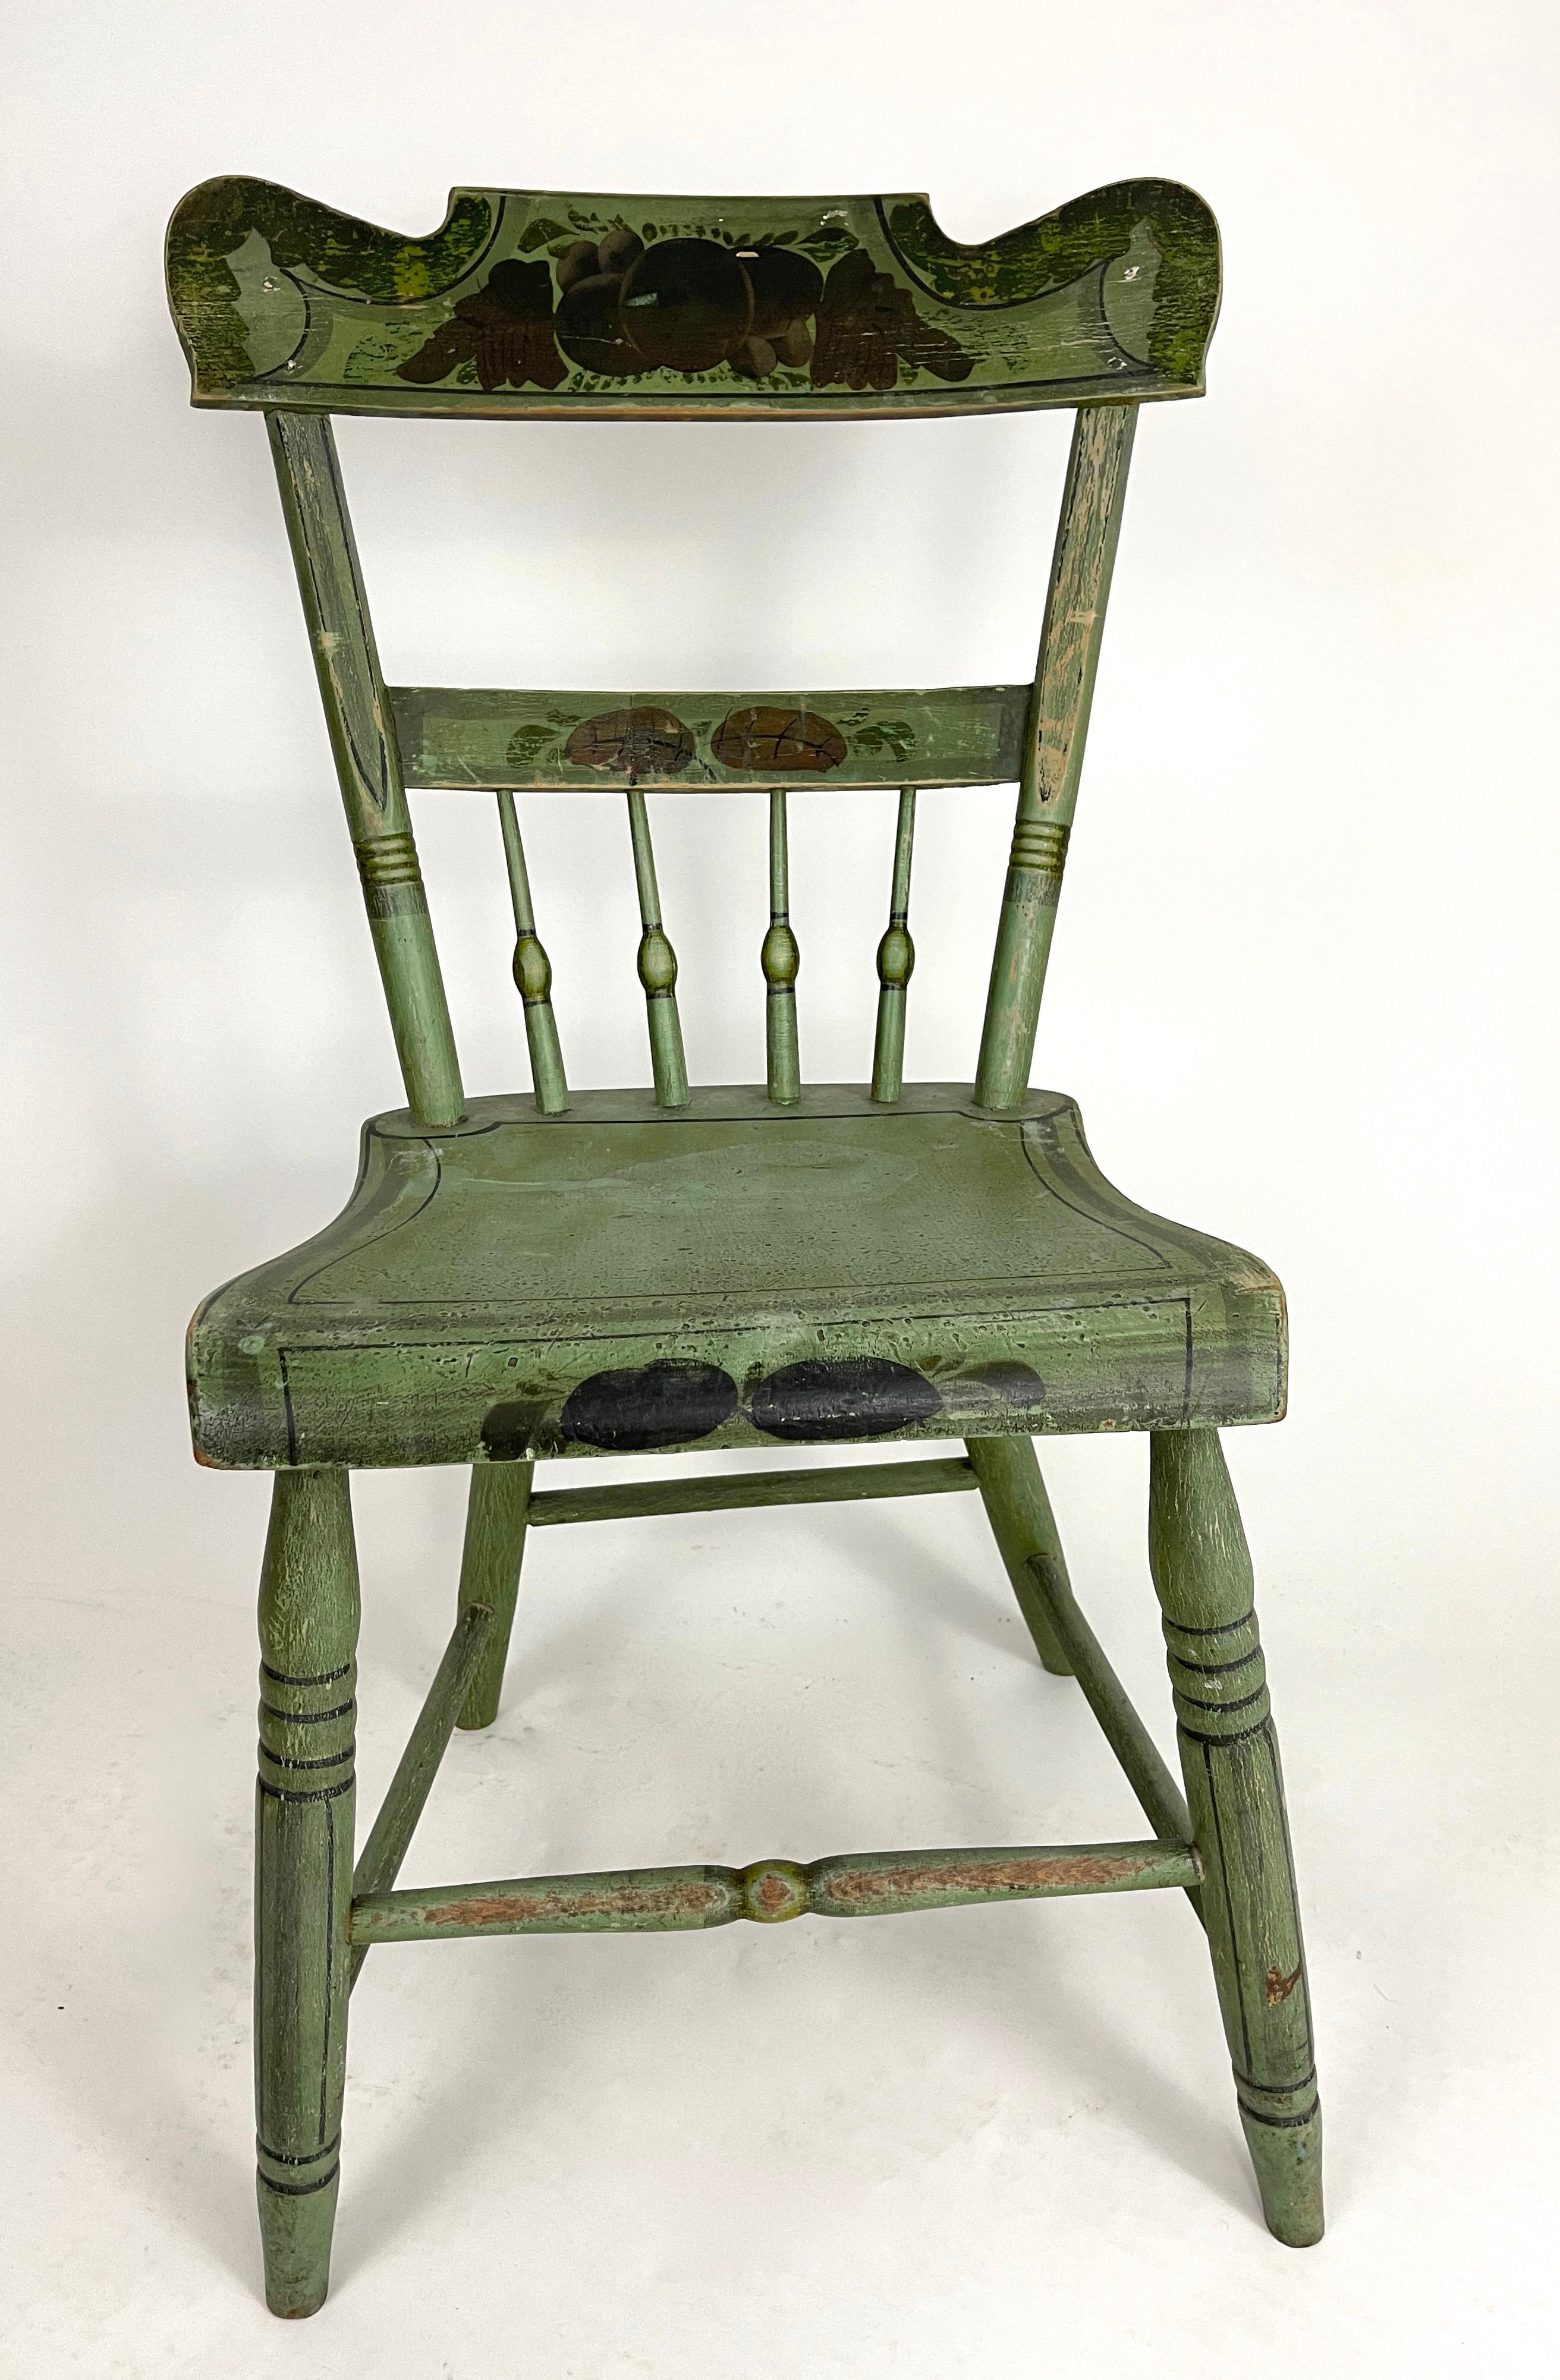 Set of 6 19th Century American Country Green Painted Dining Chairs, c. 1820-30 4